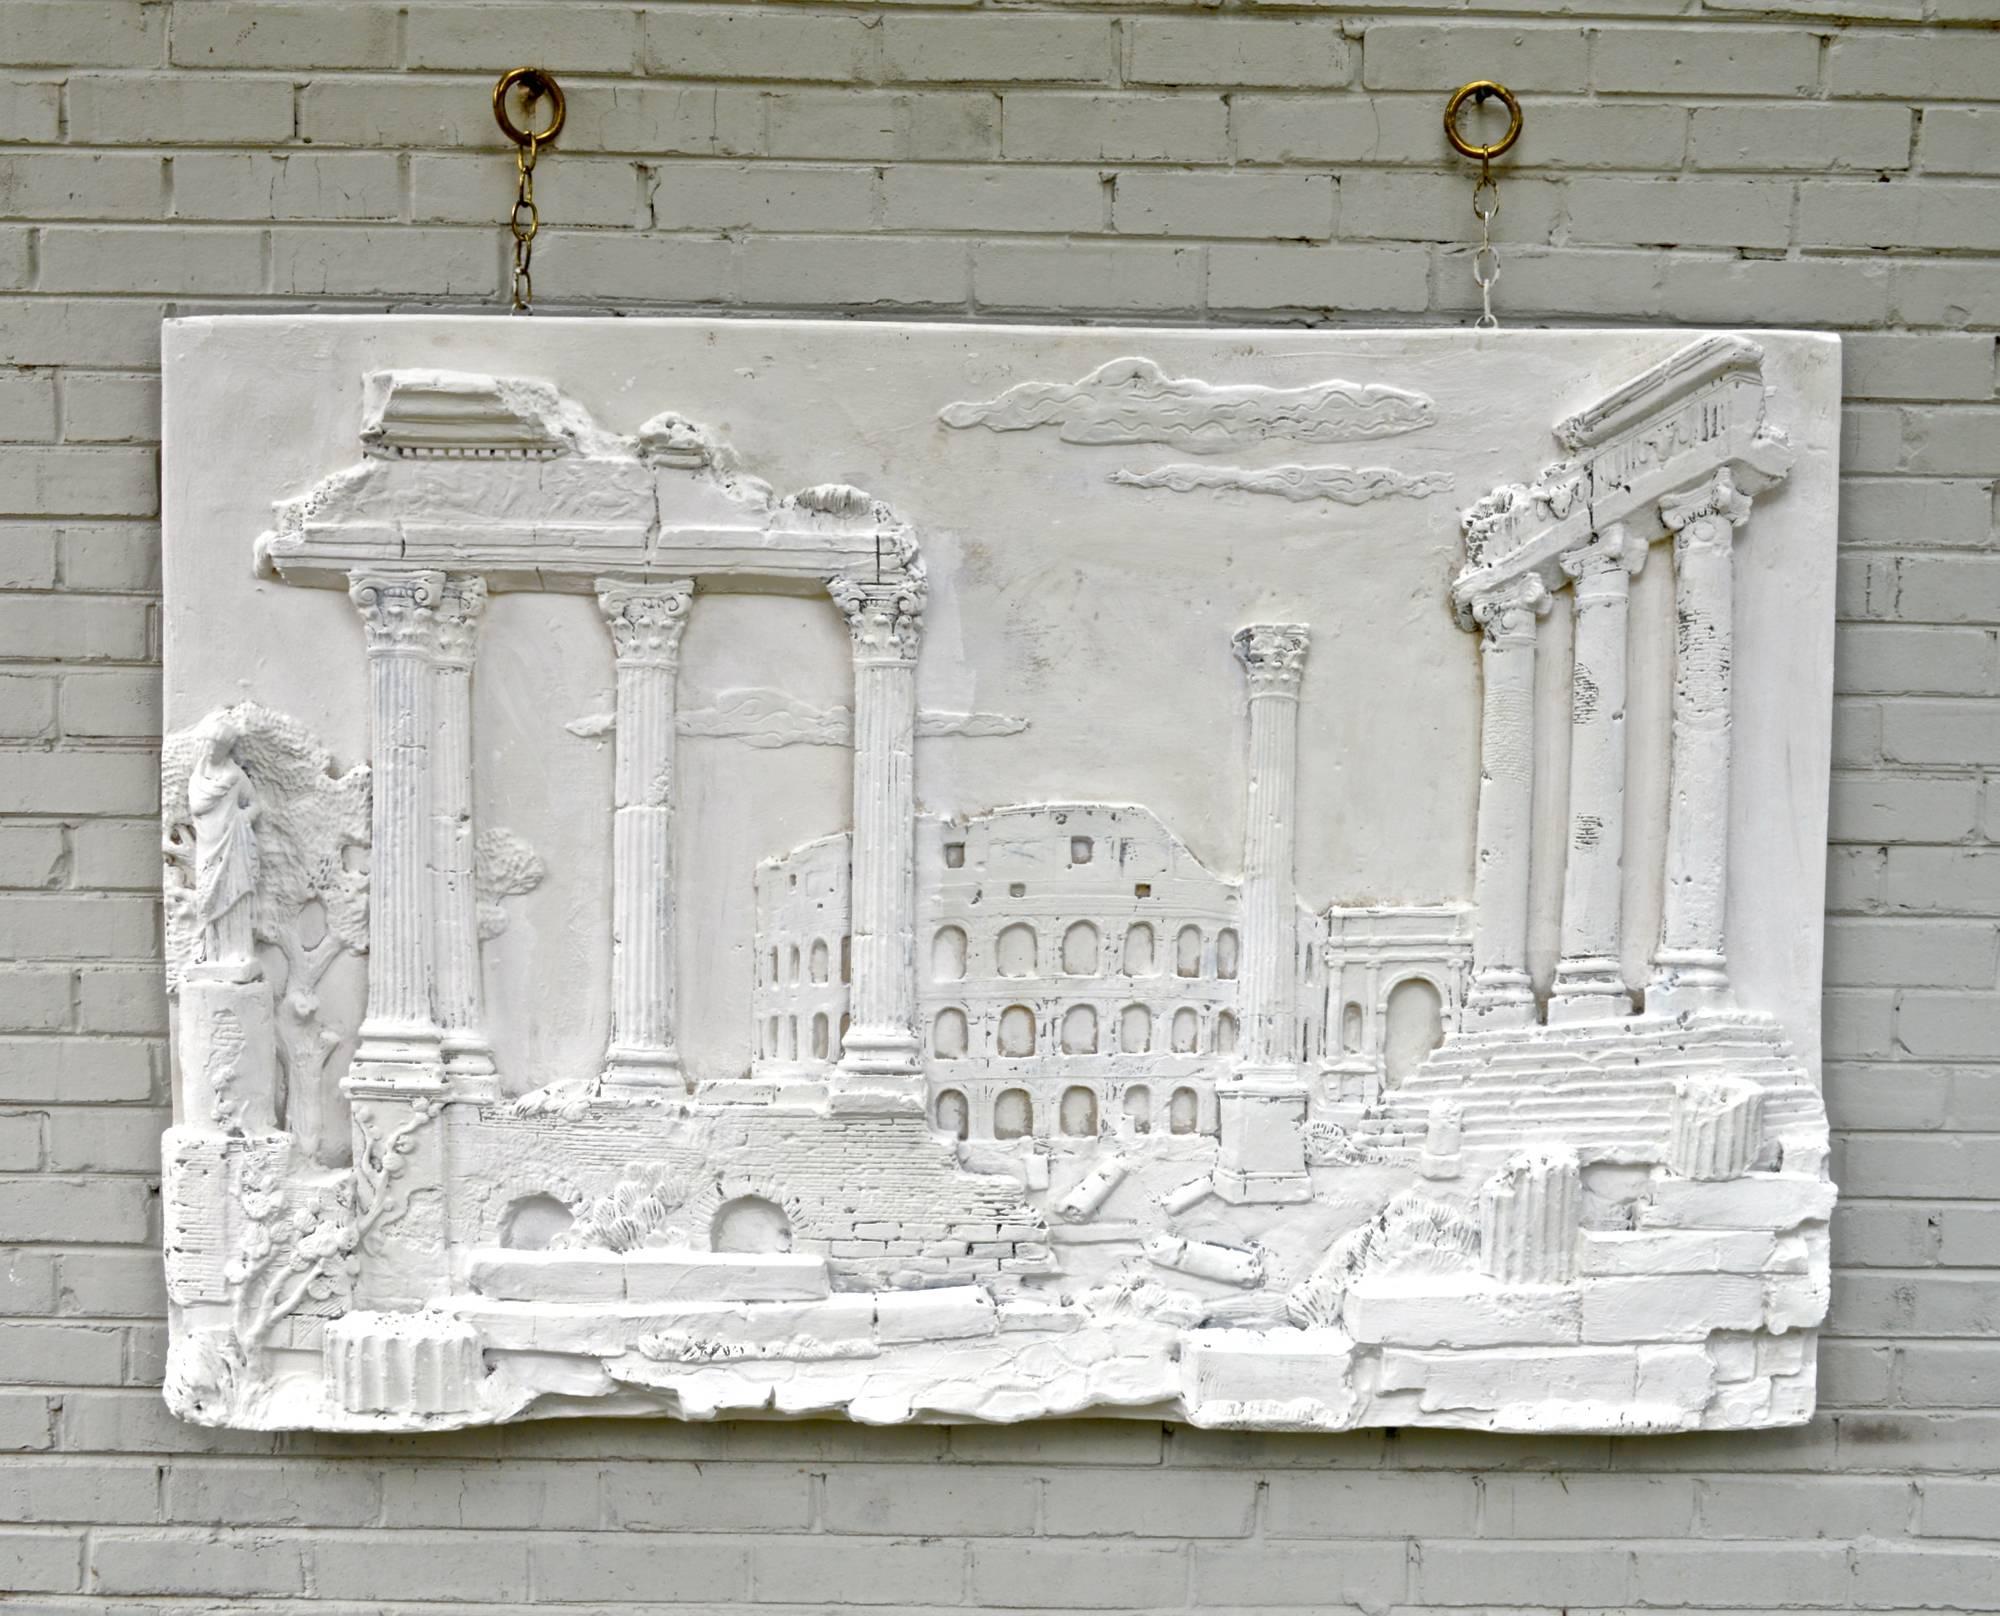 Fiberglass cast wall panel of a classical scene by Harold Studios, Inc.. The highly detailed hanging sculpture depicts ruins in spendor and will make a dramatic impact wherever it is employed. Circa 1950's. 